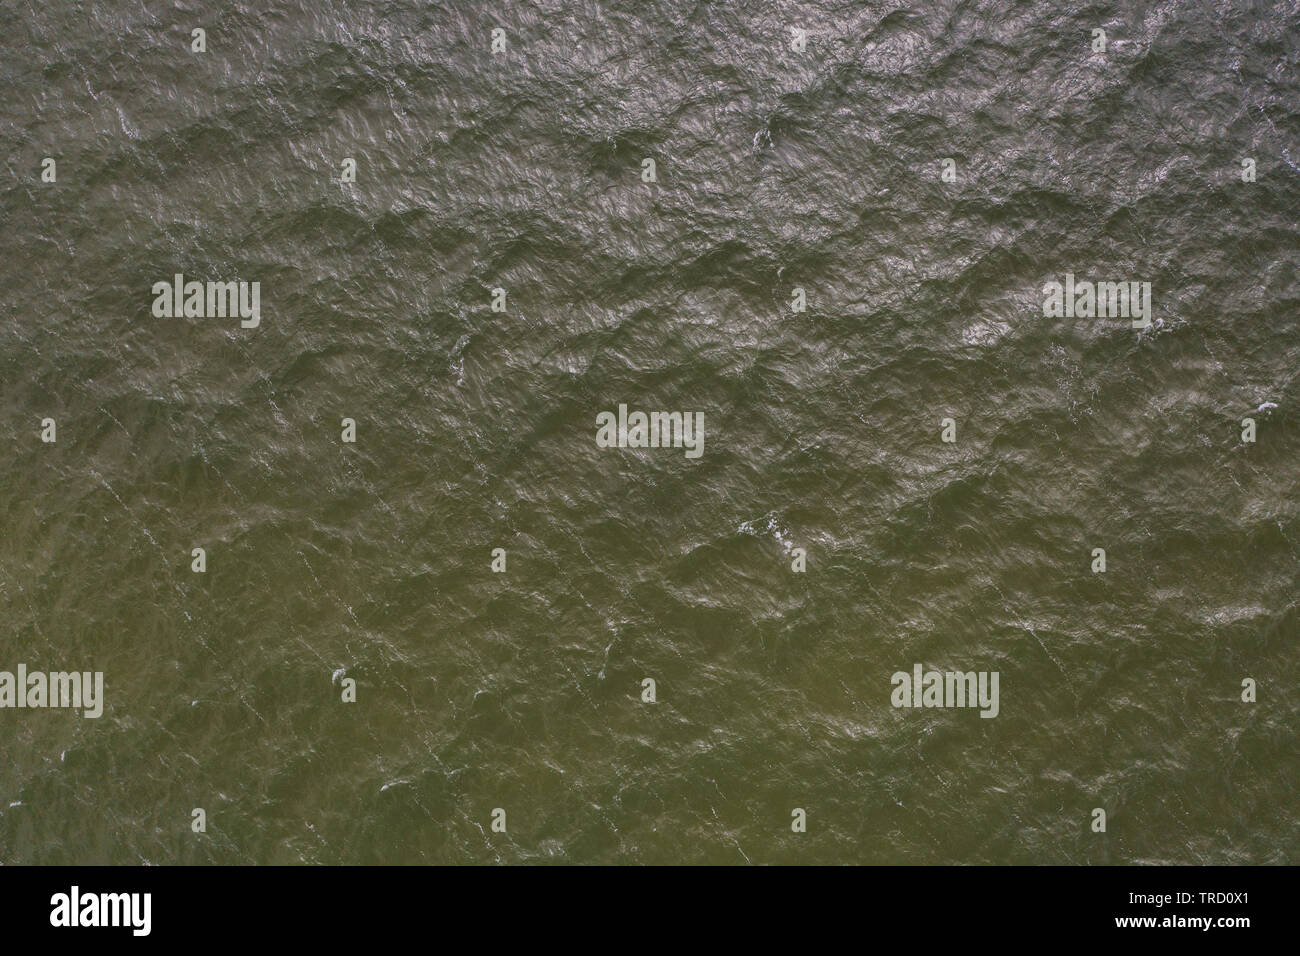 topdown view of the water surface. Stock Photo